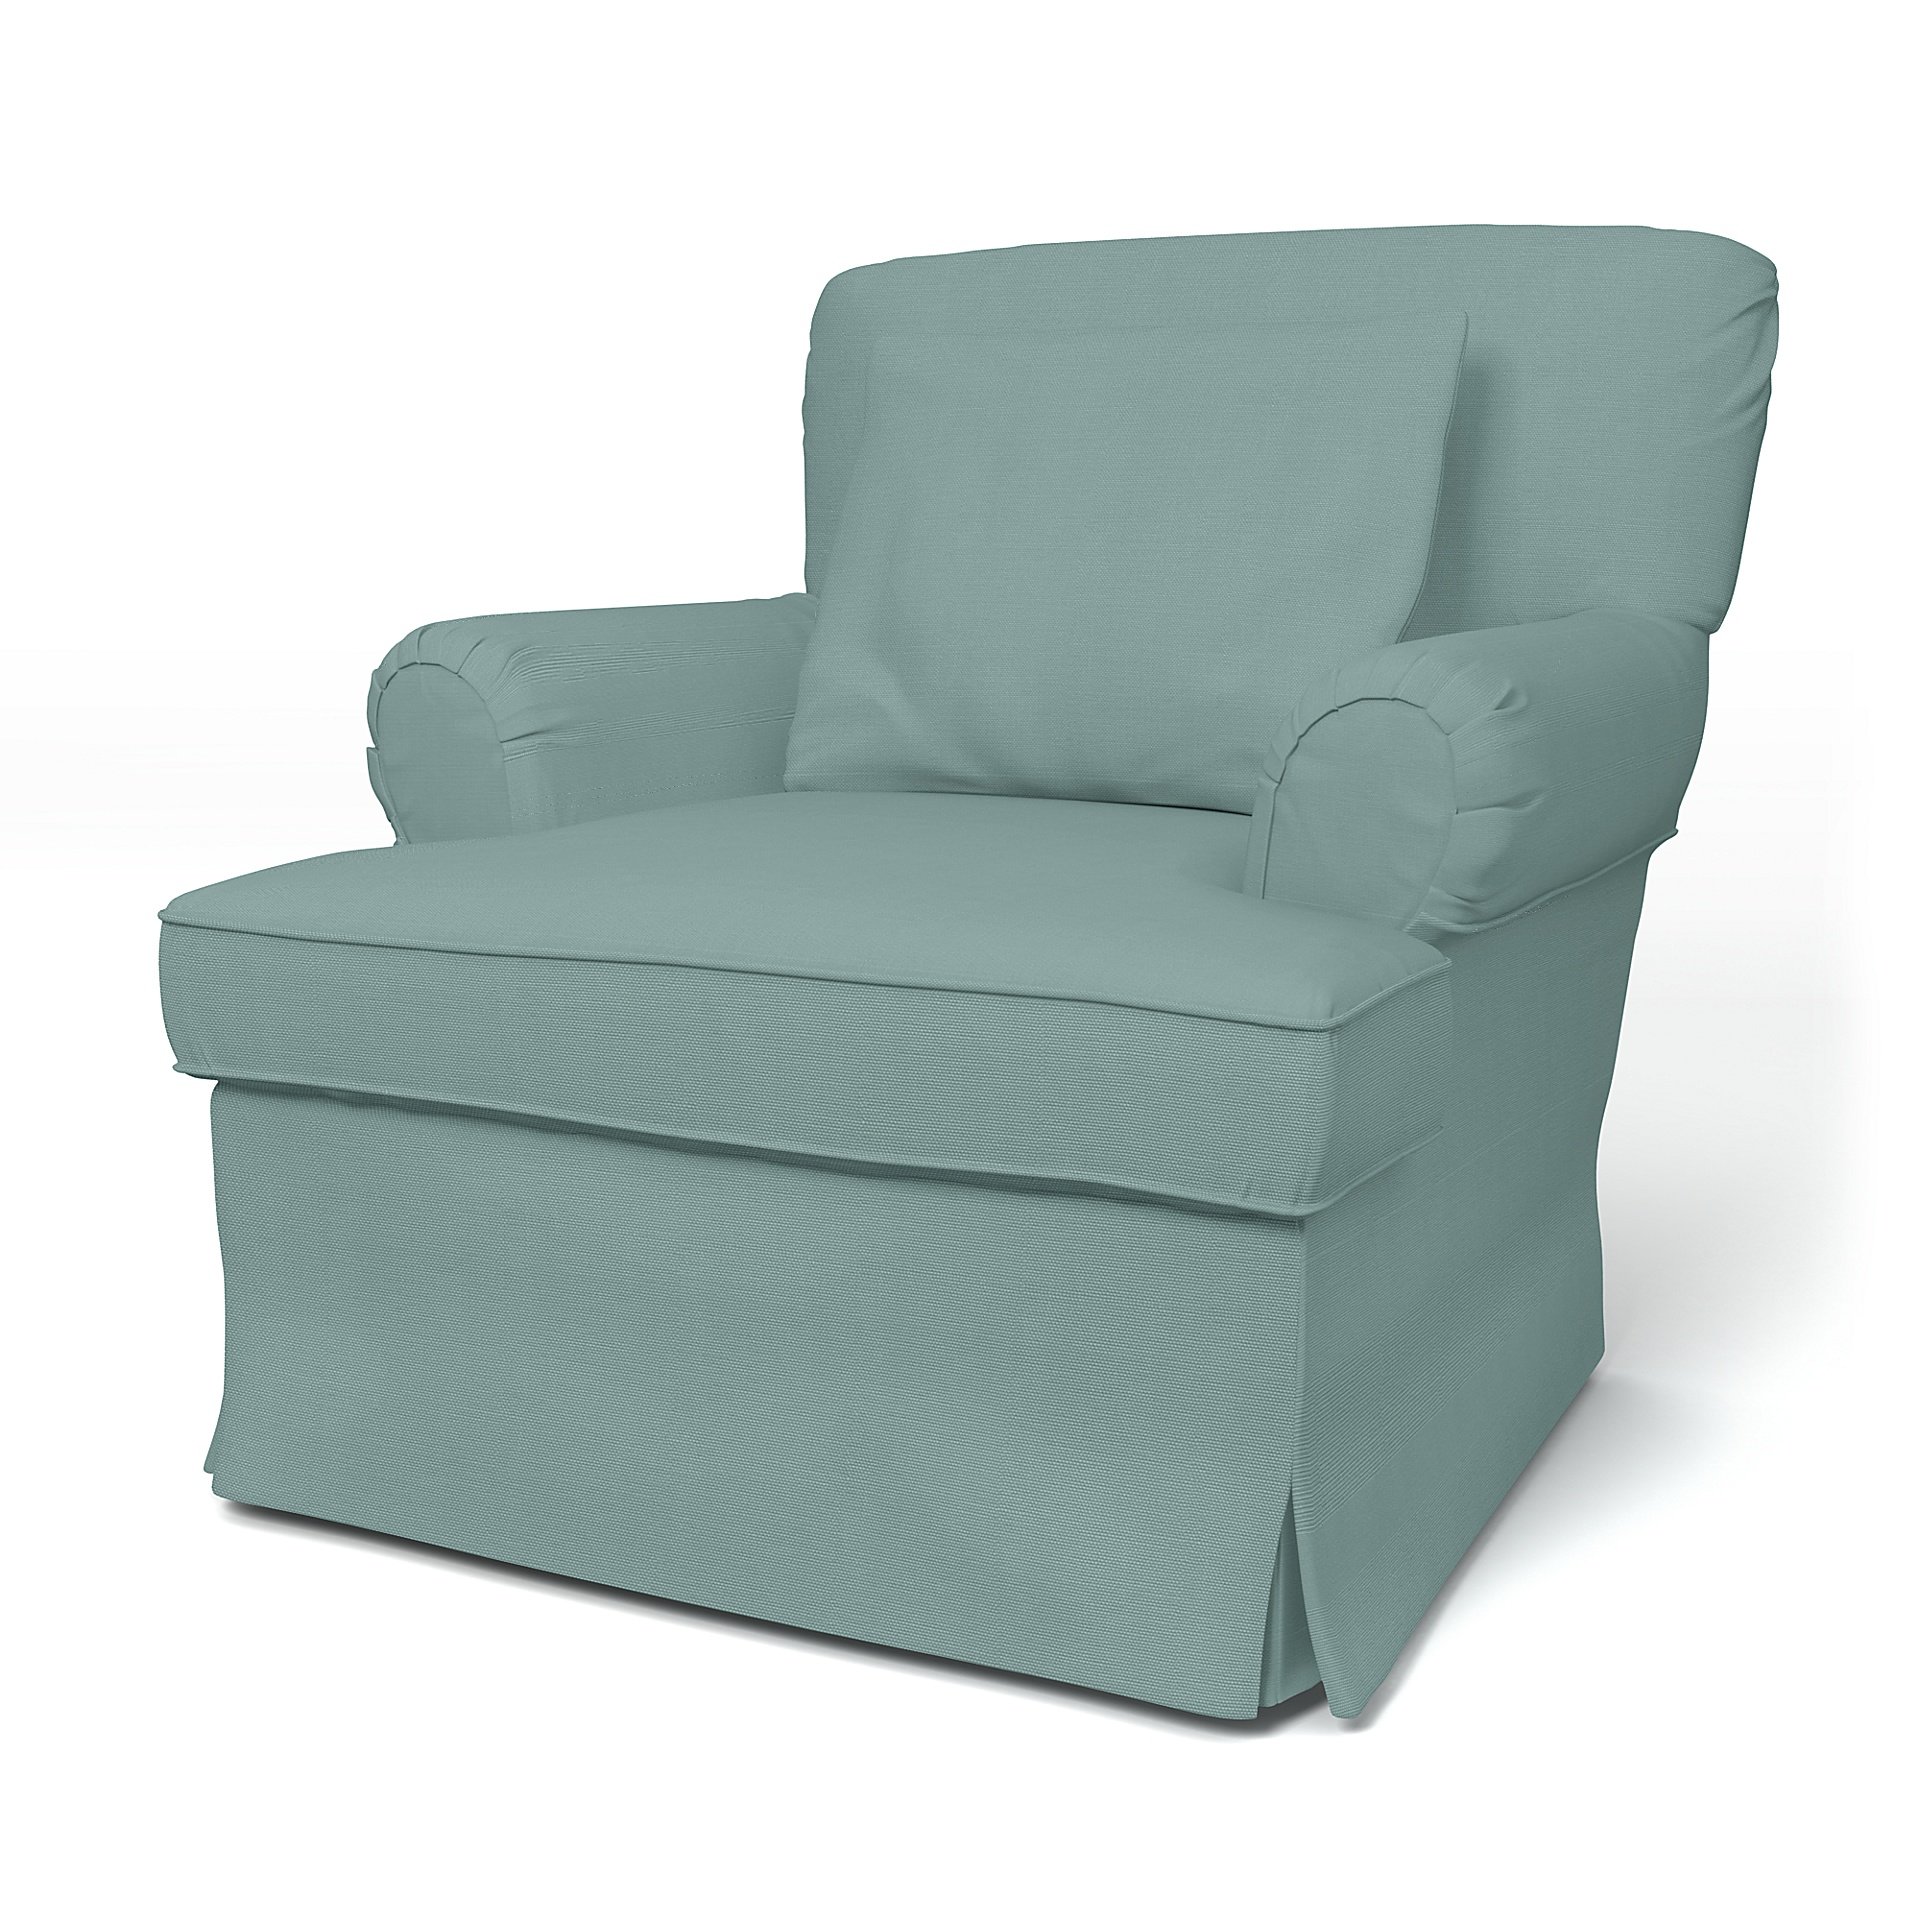 IKEA - Stockholm Armchair Cover (1994-2000) Small, Mineral Blue, Cotton - Bemz